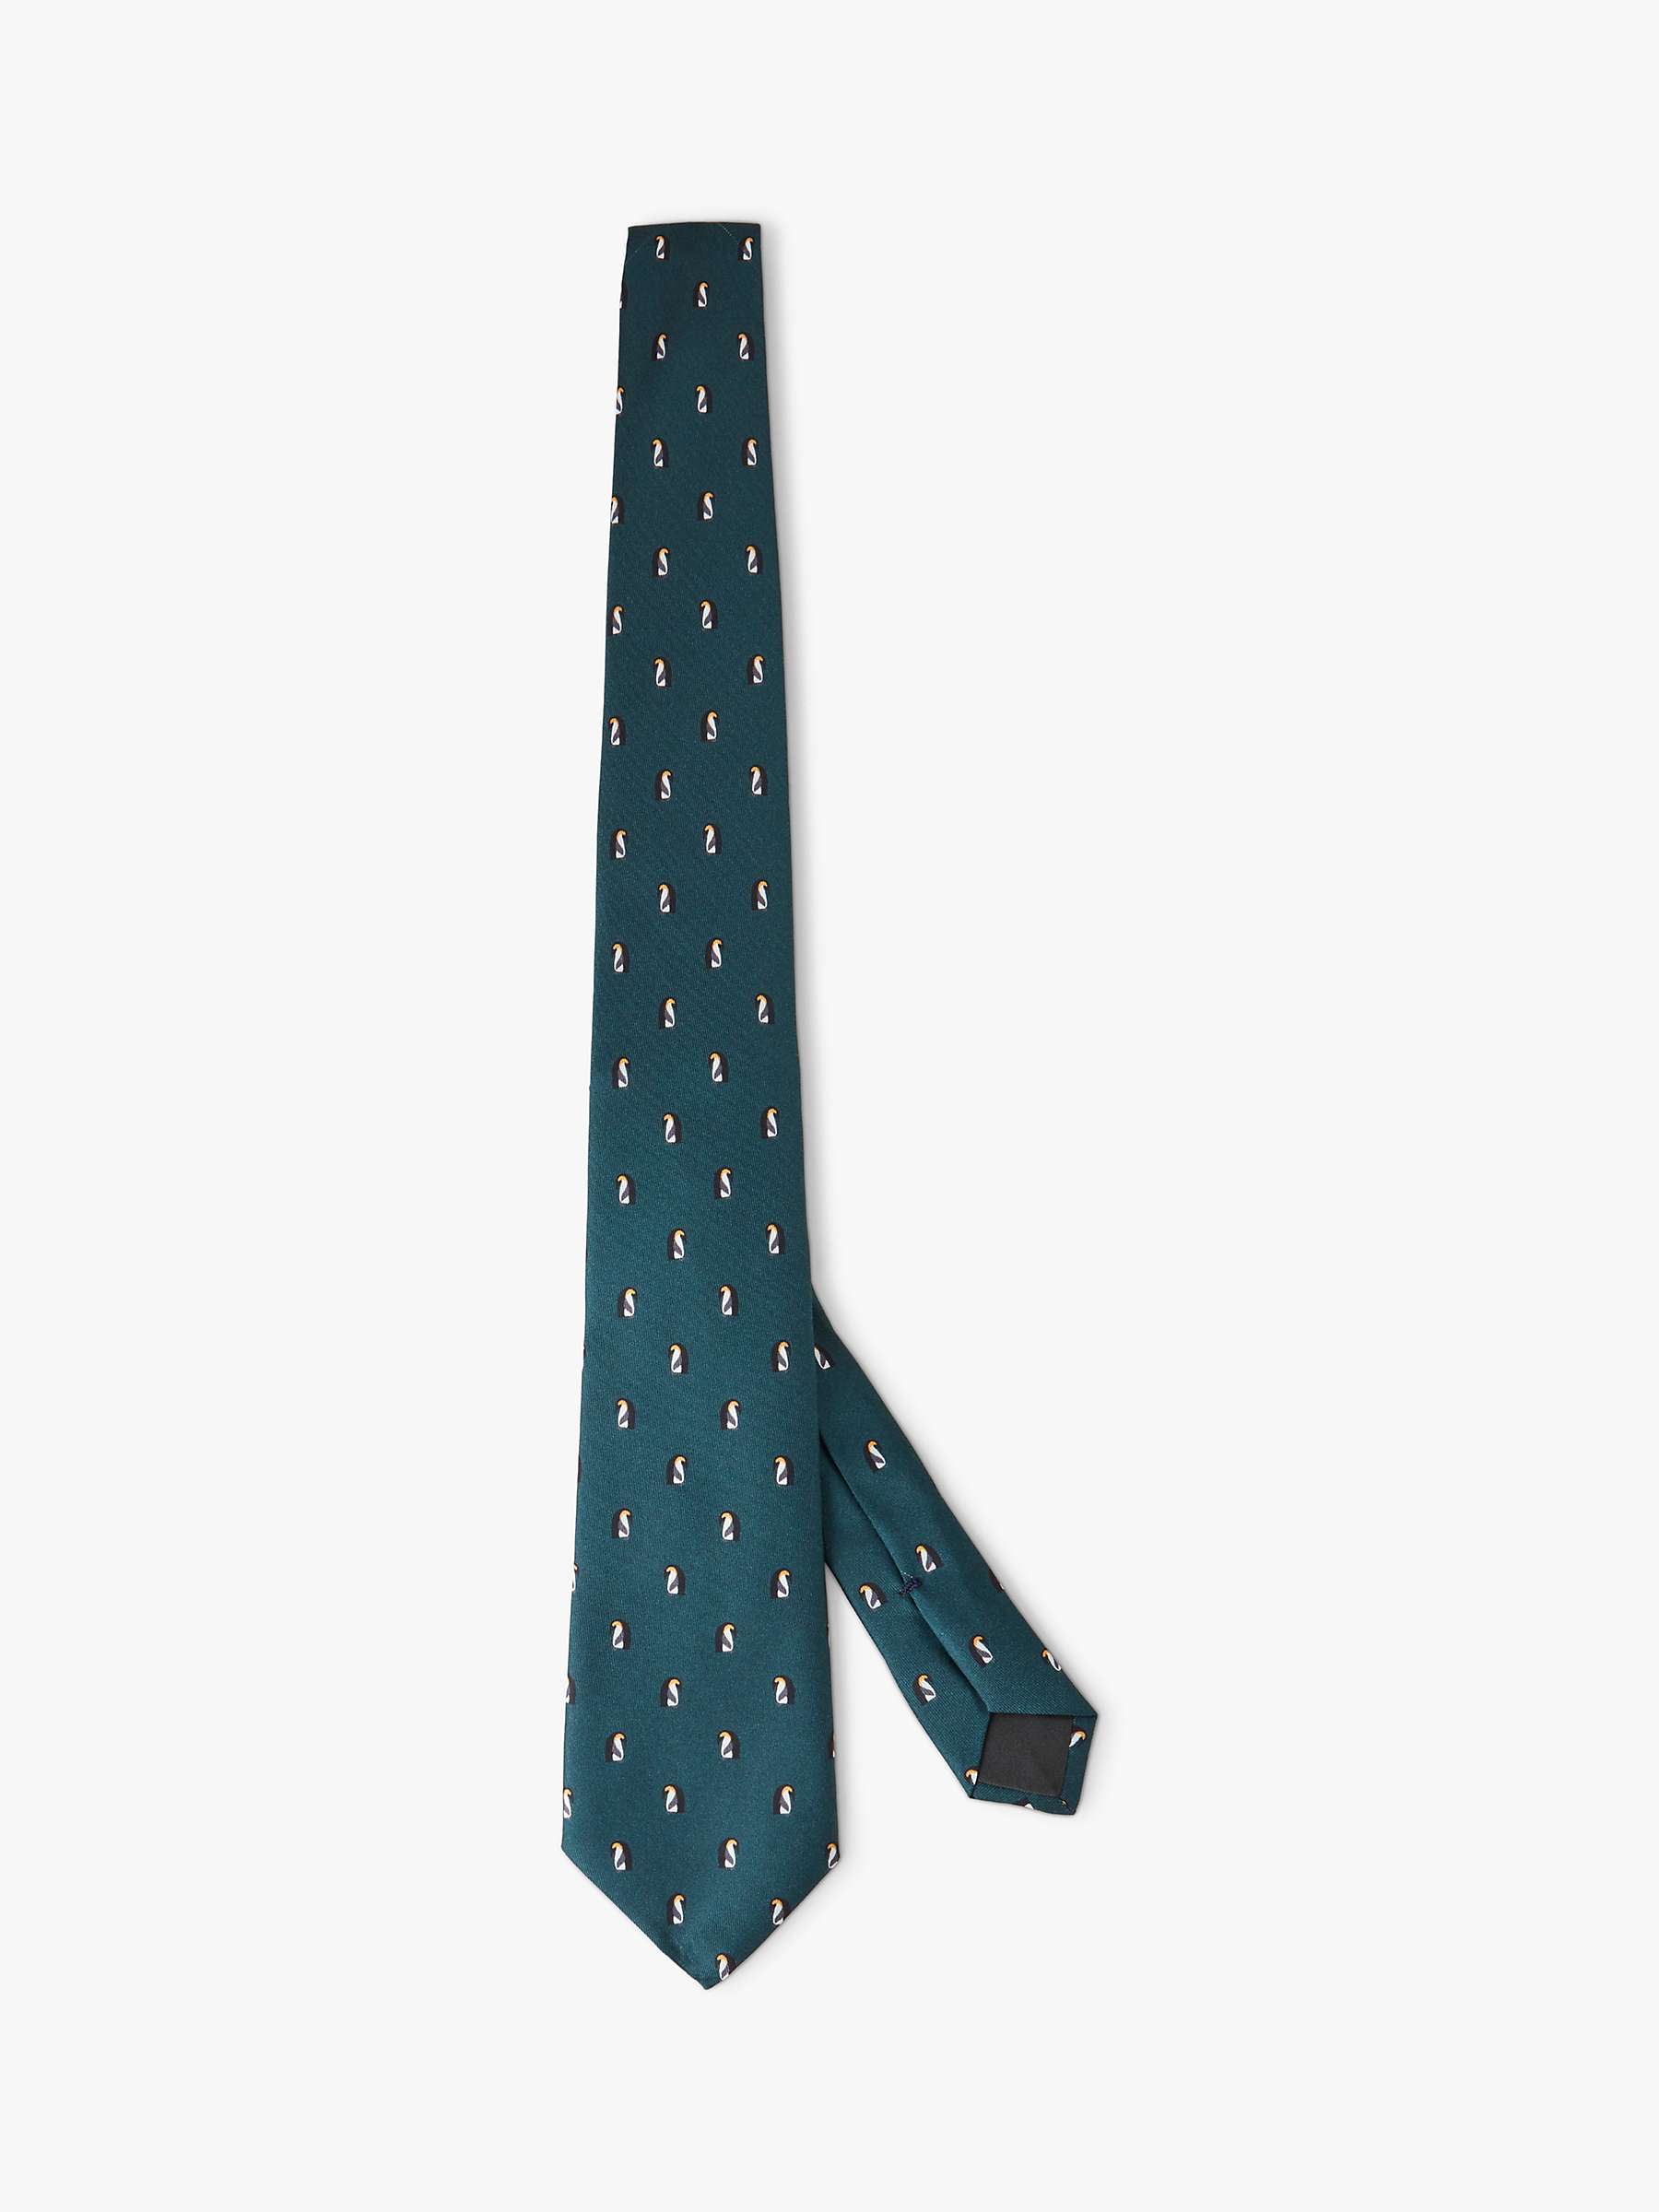 Buy Mulberry Silk Penguin Tie, Mulberry Green Online at johnlewis.com